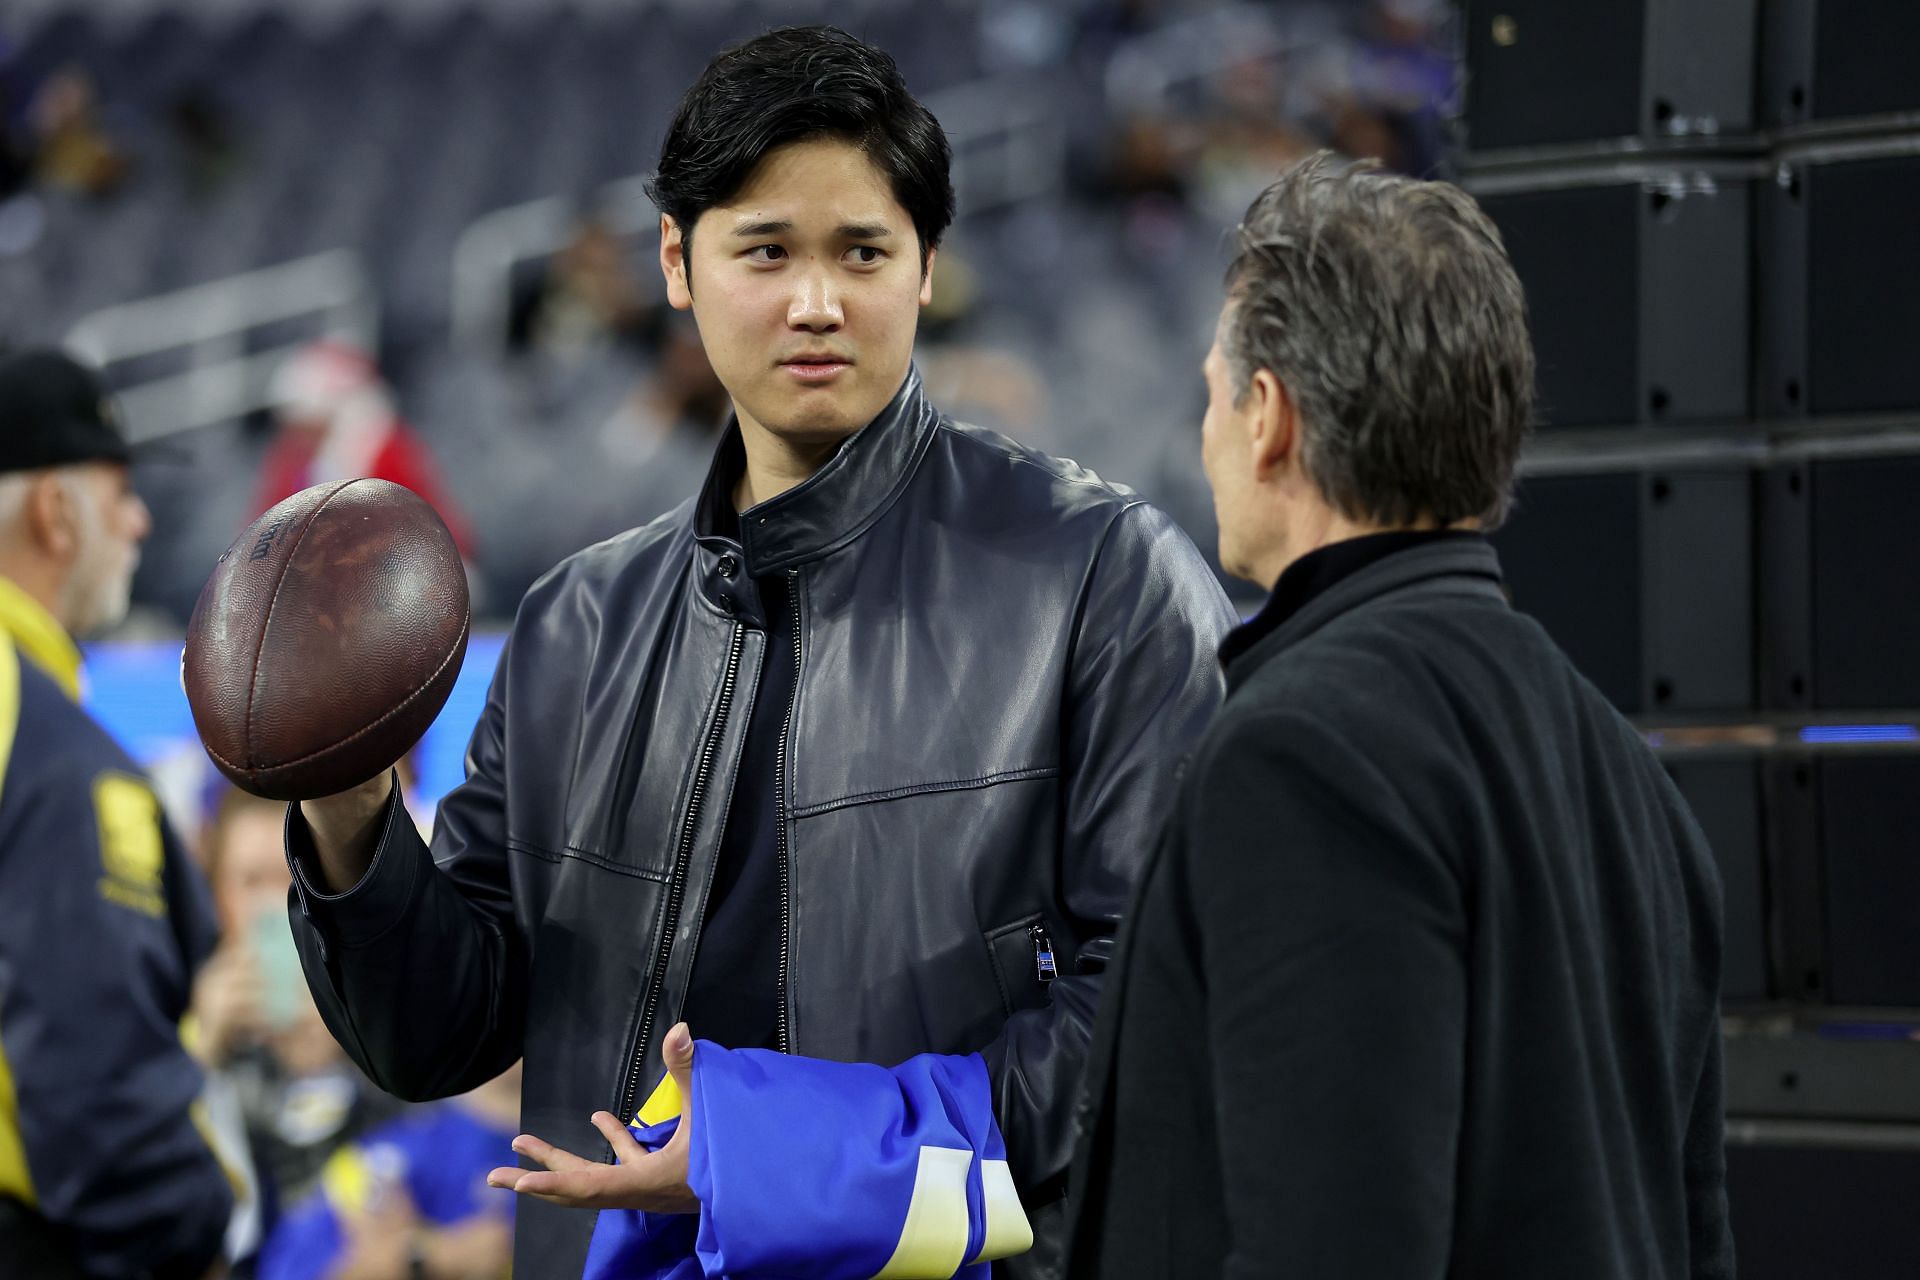 Shohei Ohtani is paid handsomely